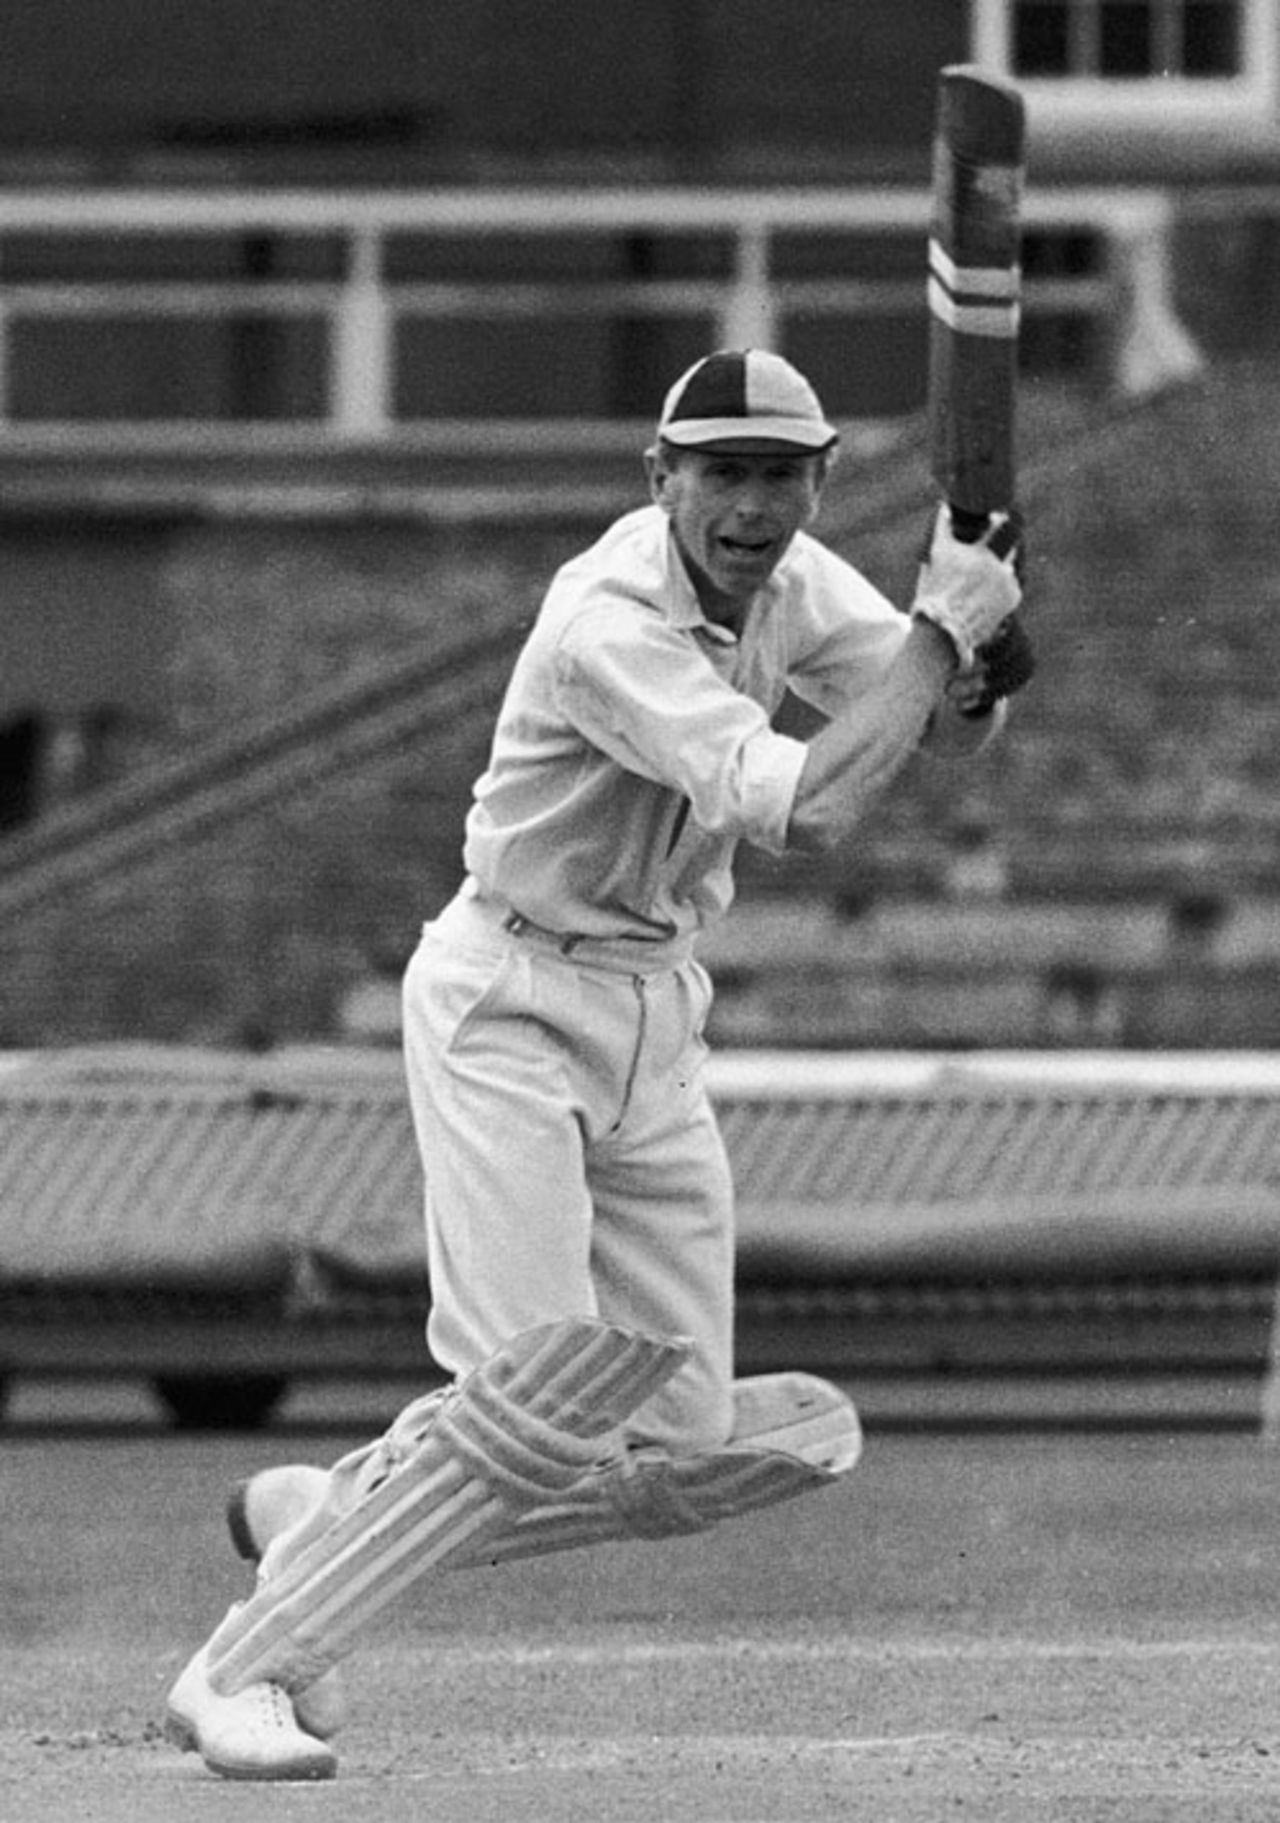 British politician Alec Douglas-Home bats for the Lords and Commons against an Egyptian team, Lord's, June 18, 1951